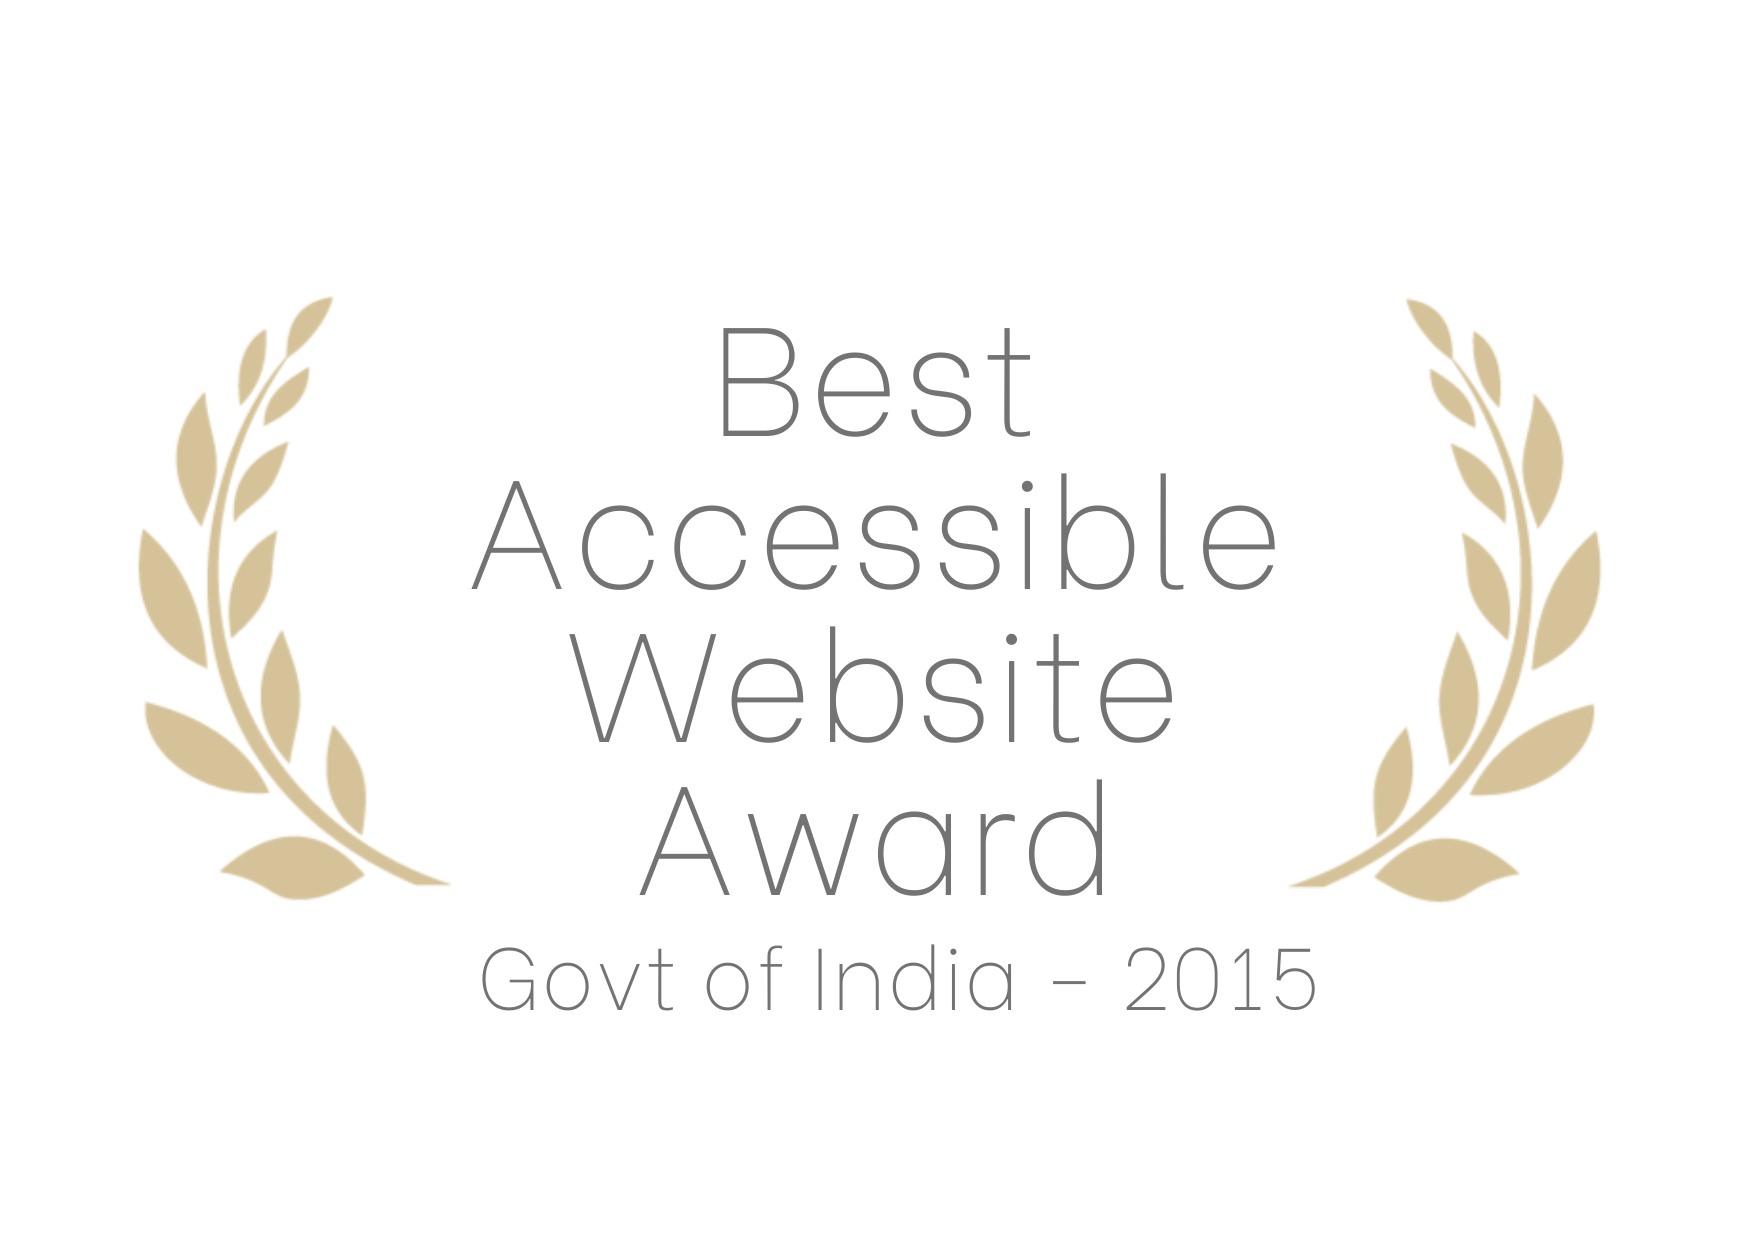 Best Accessible Website Award received from Government of India in 2015